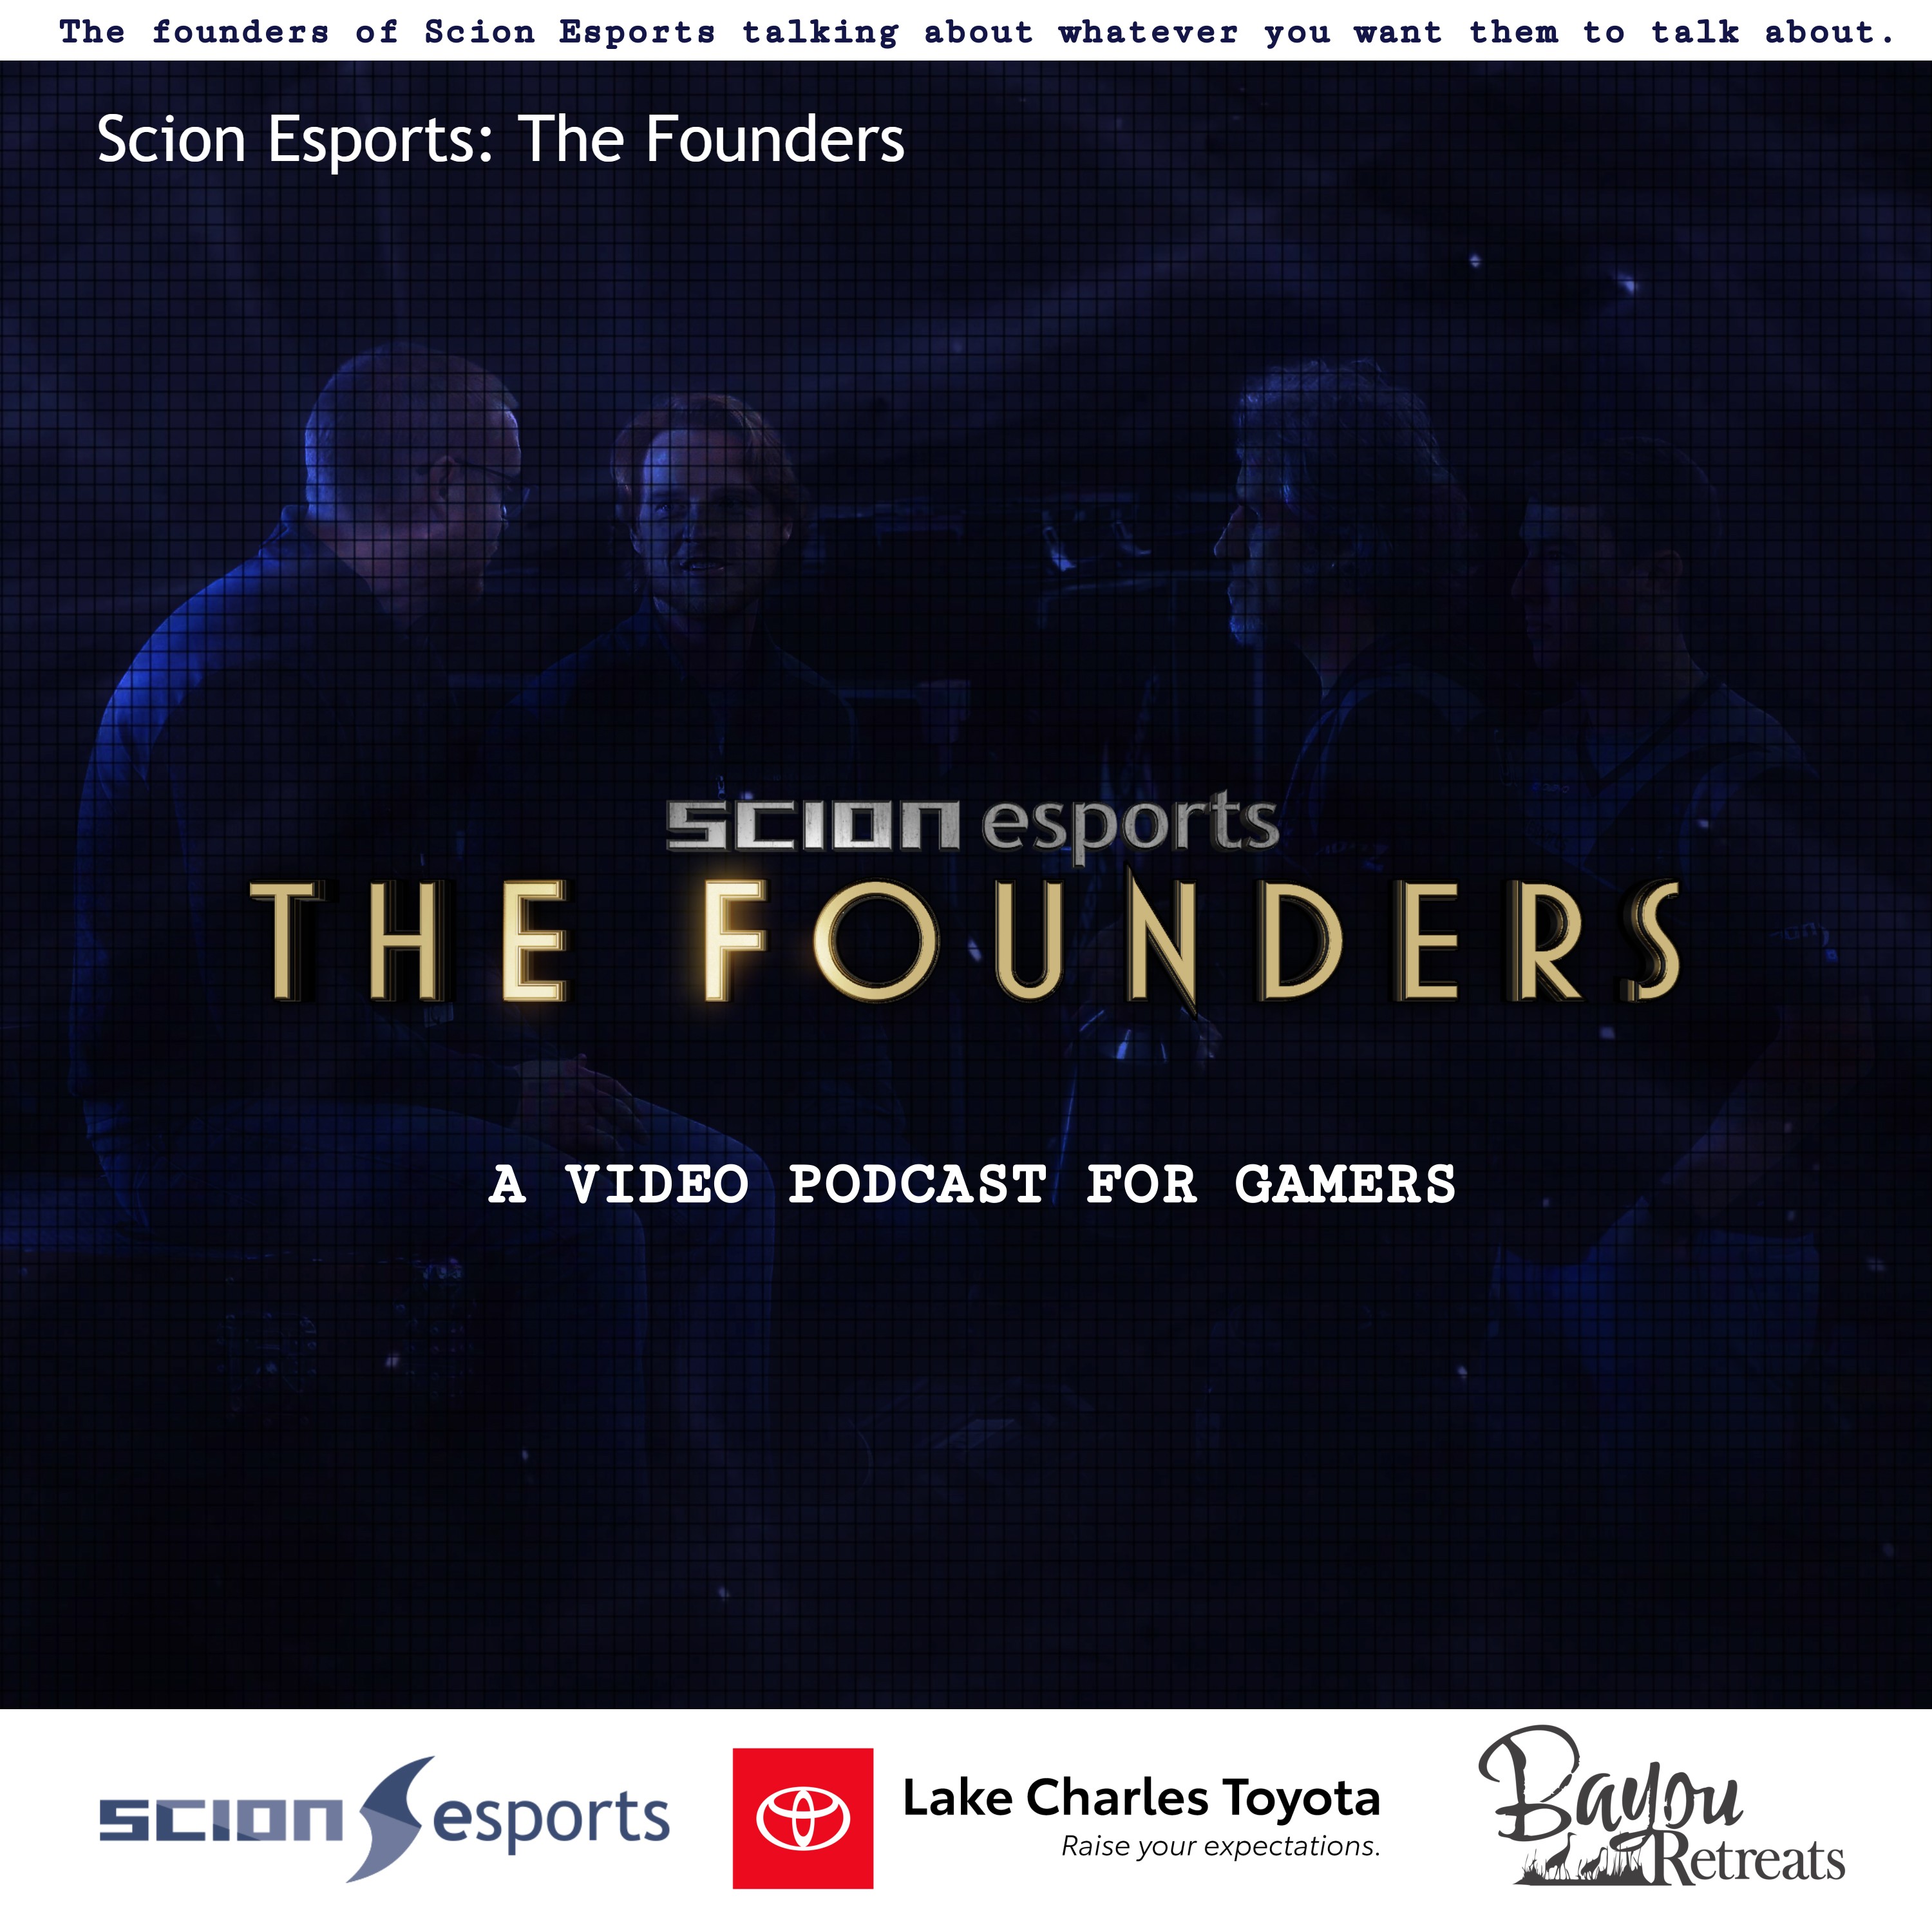 Scion Esports: The Founders Podcast